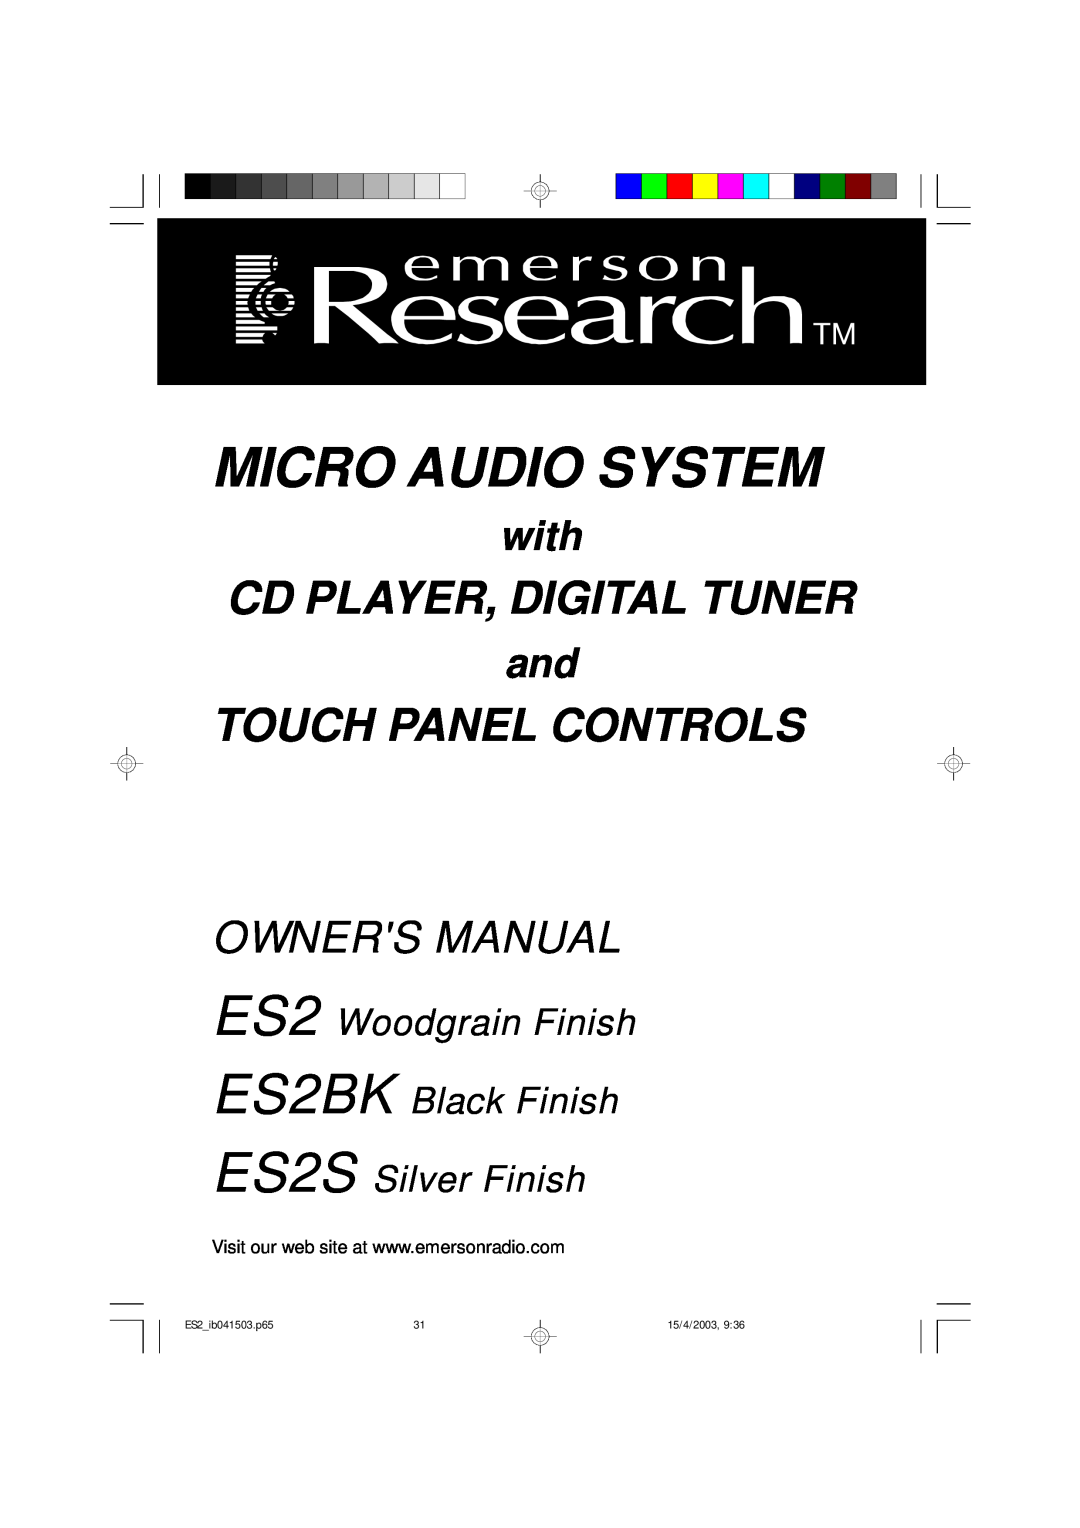 Emerson owner manual Micro Audio System, Cd Player, Digital Tuner, Touch Panel Controls, with, ES2S Silver Finish 